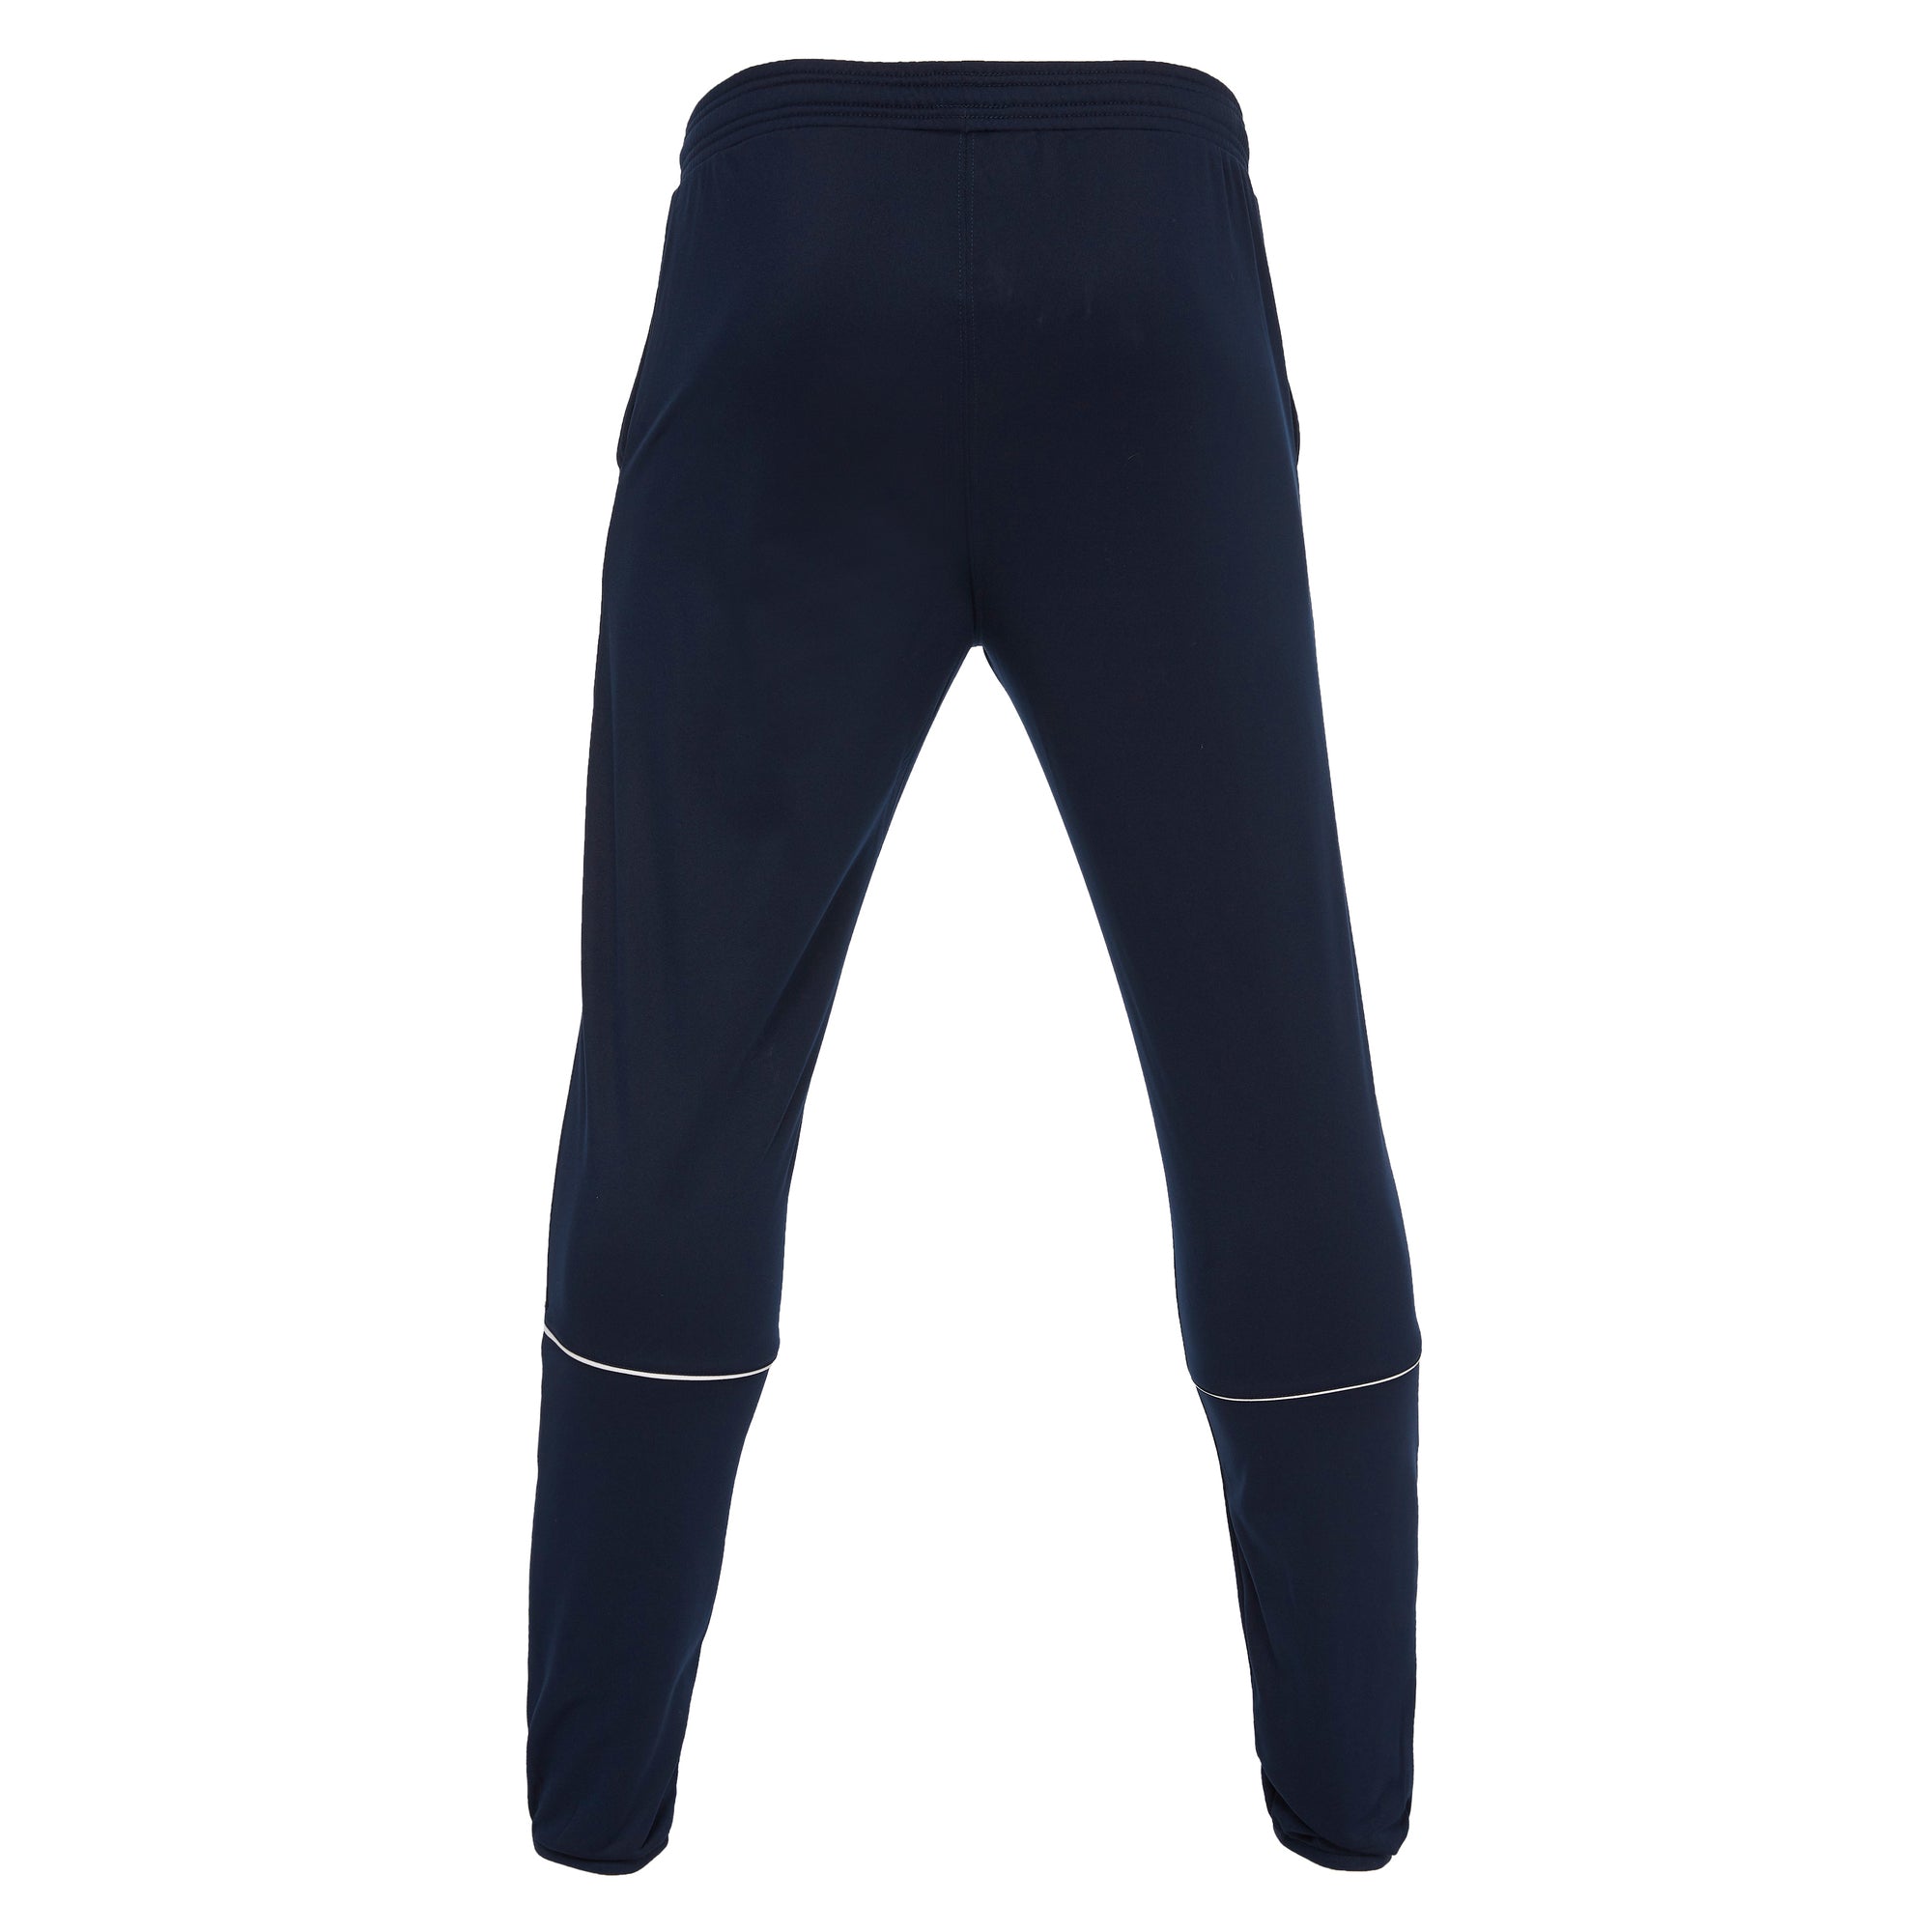 THE DRIVE - ABYDOS HERO PANTS (UNISEX)